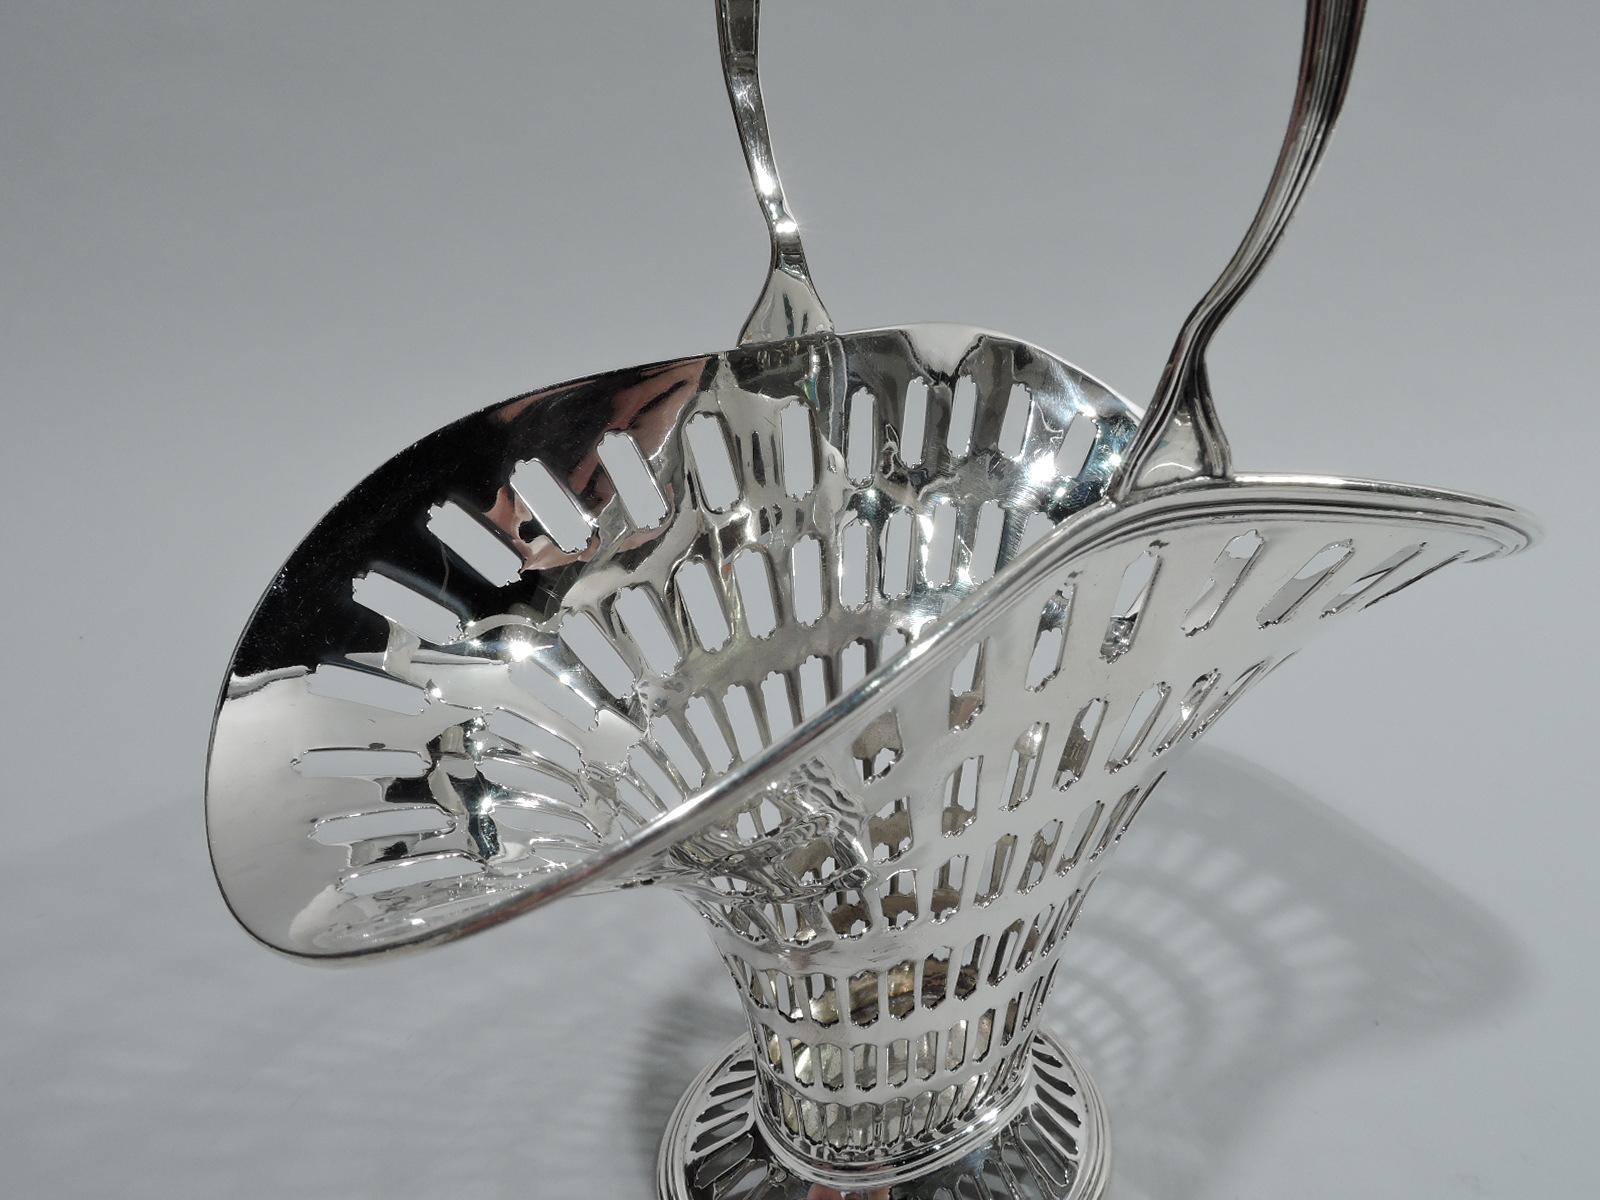 Edwardian Modern sterling silver basket. Made by Tiffany & Co. in New York. Tapering and “squashed” ovoid body with flared mouth and spread foot. Reeded and tapering stationary handle. Graduated tubular piercing. Fully marked including maker’s